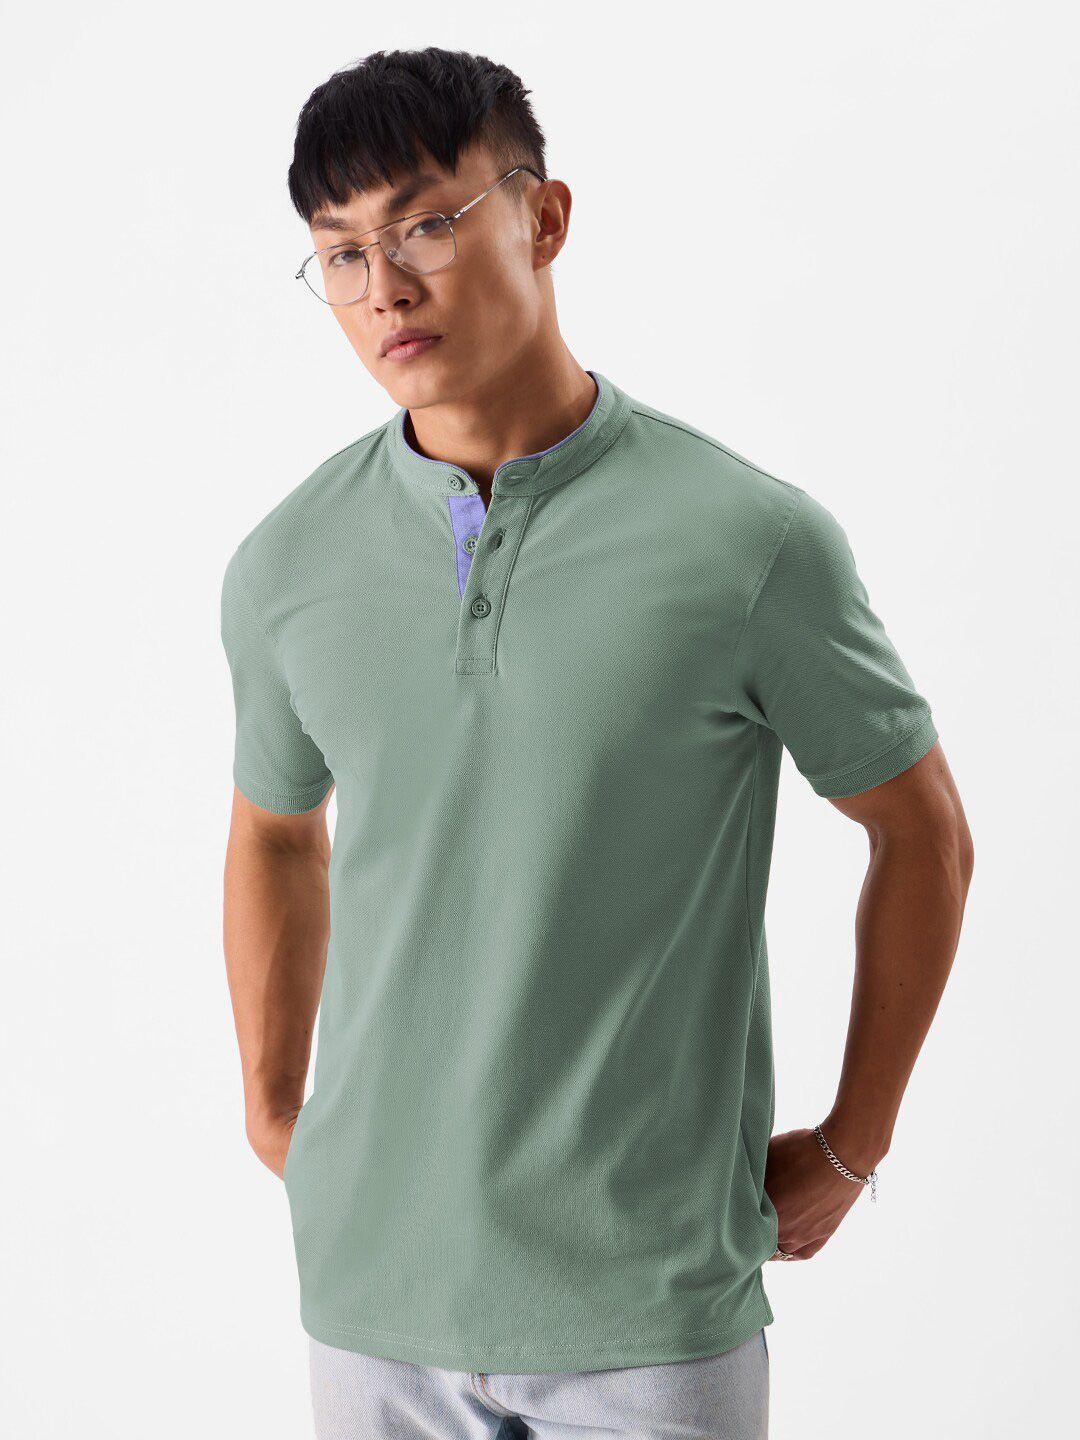 the souled store green henley neck pure cotton t-shirt